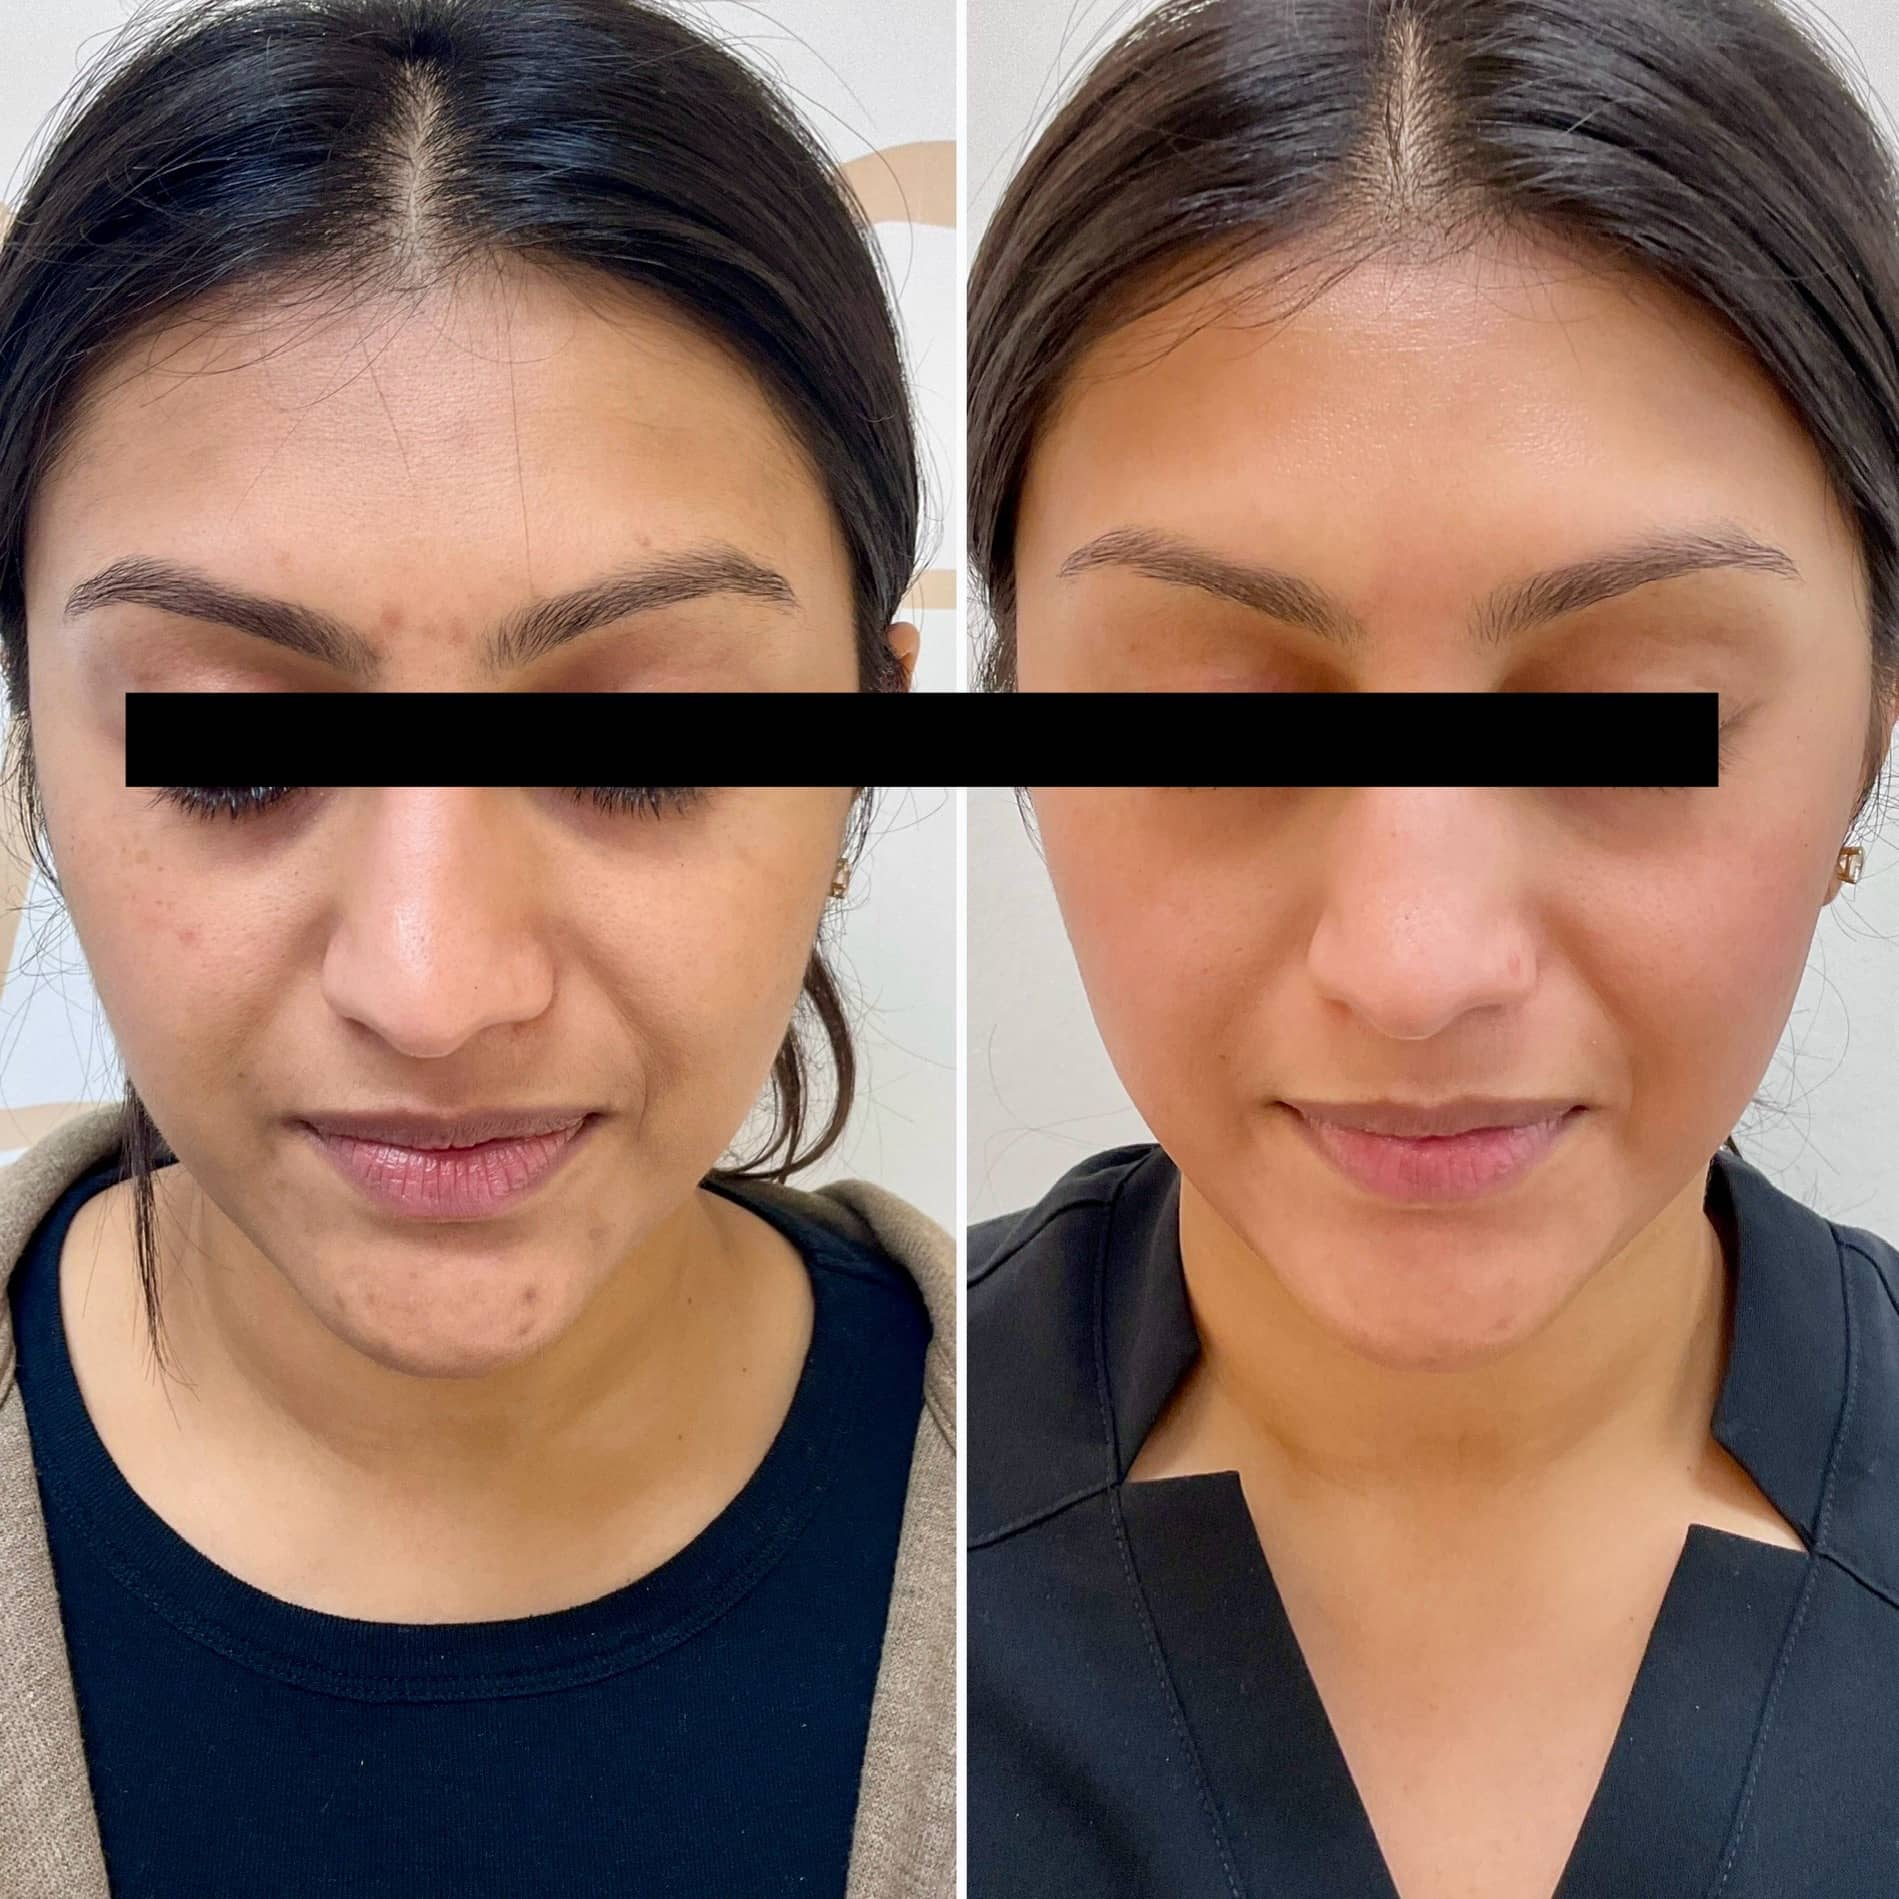 Treatment of hyperpigmentation using the Picosure Pro laser